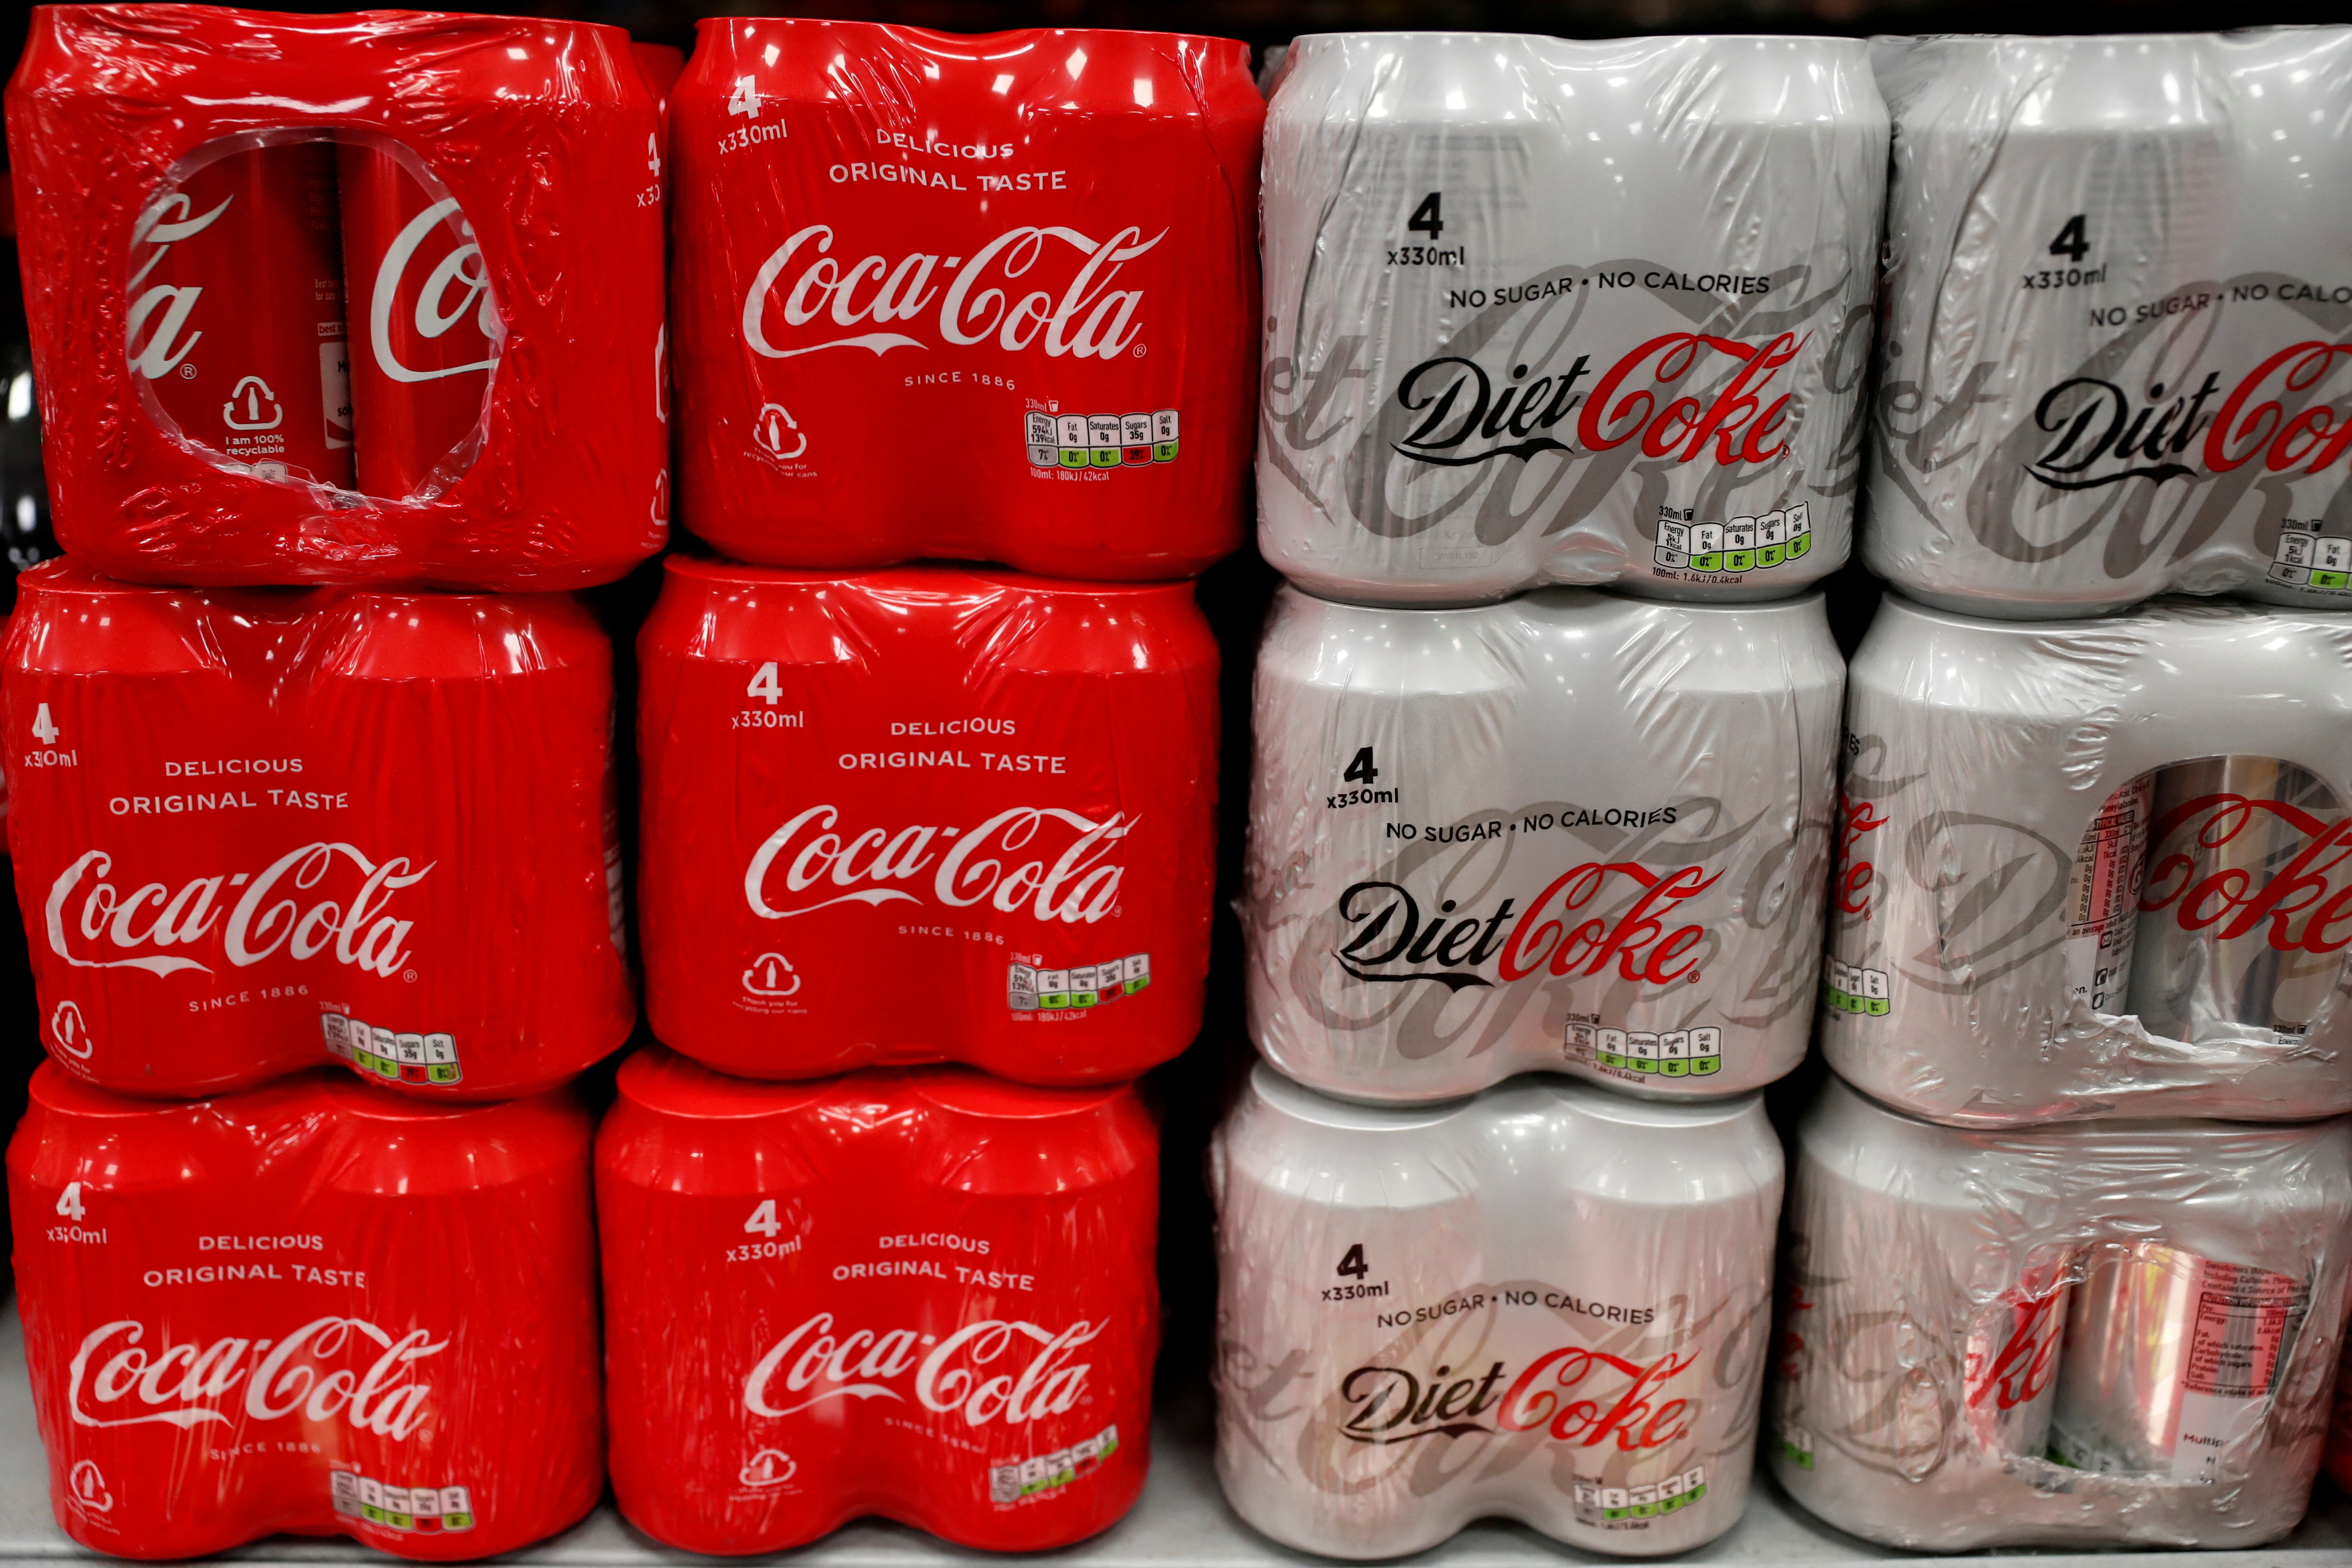 Multi can packs of Coca Cola and Diet Coke are seen for sale in a motorway services shop, Reading